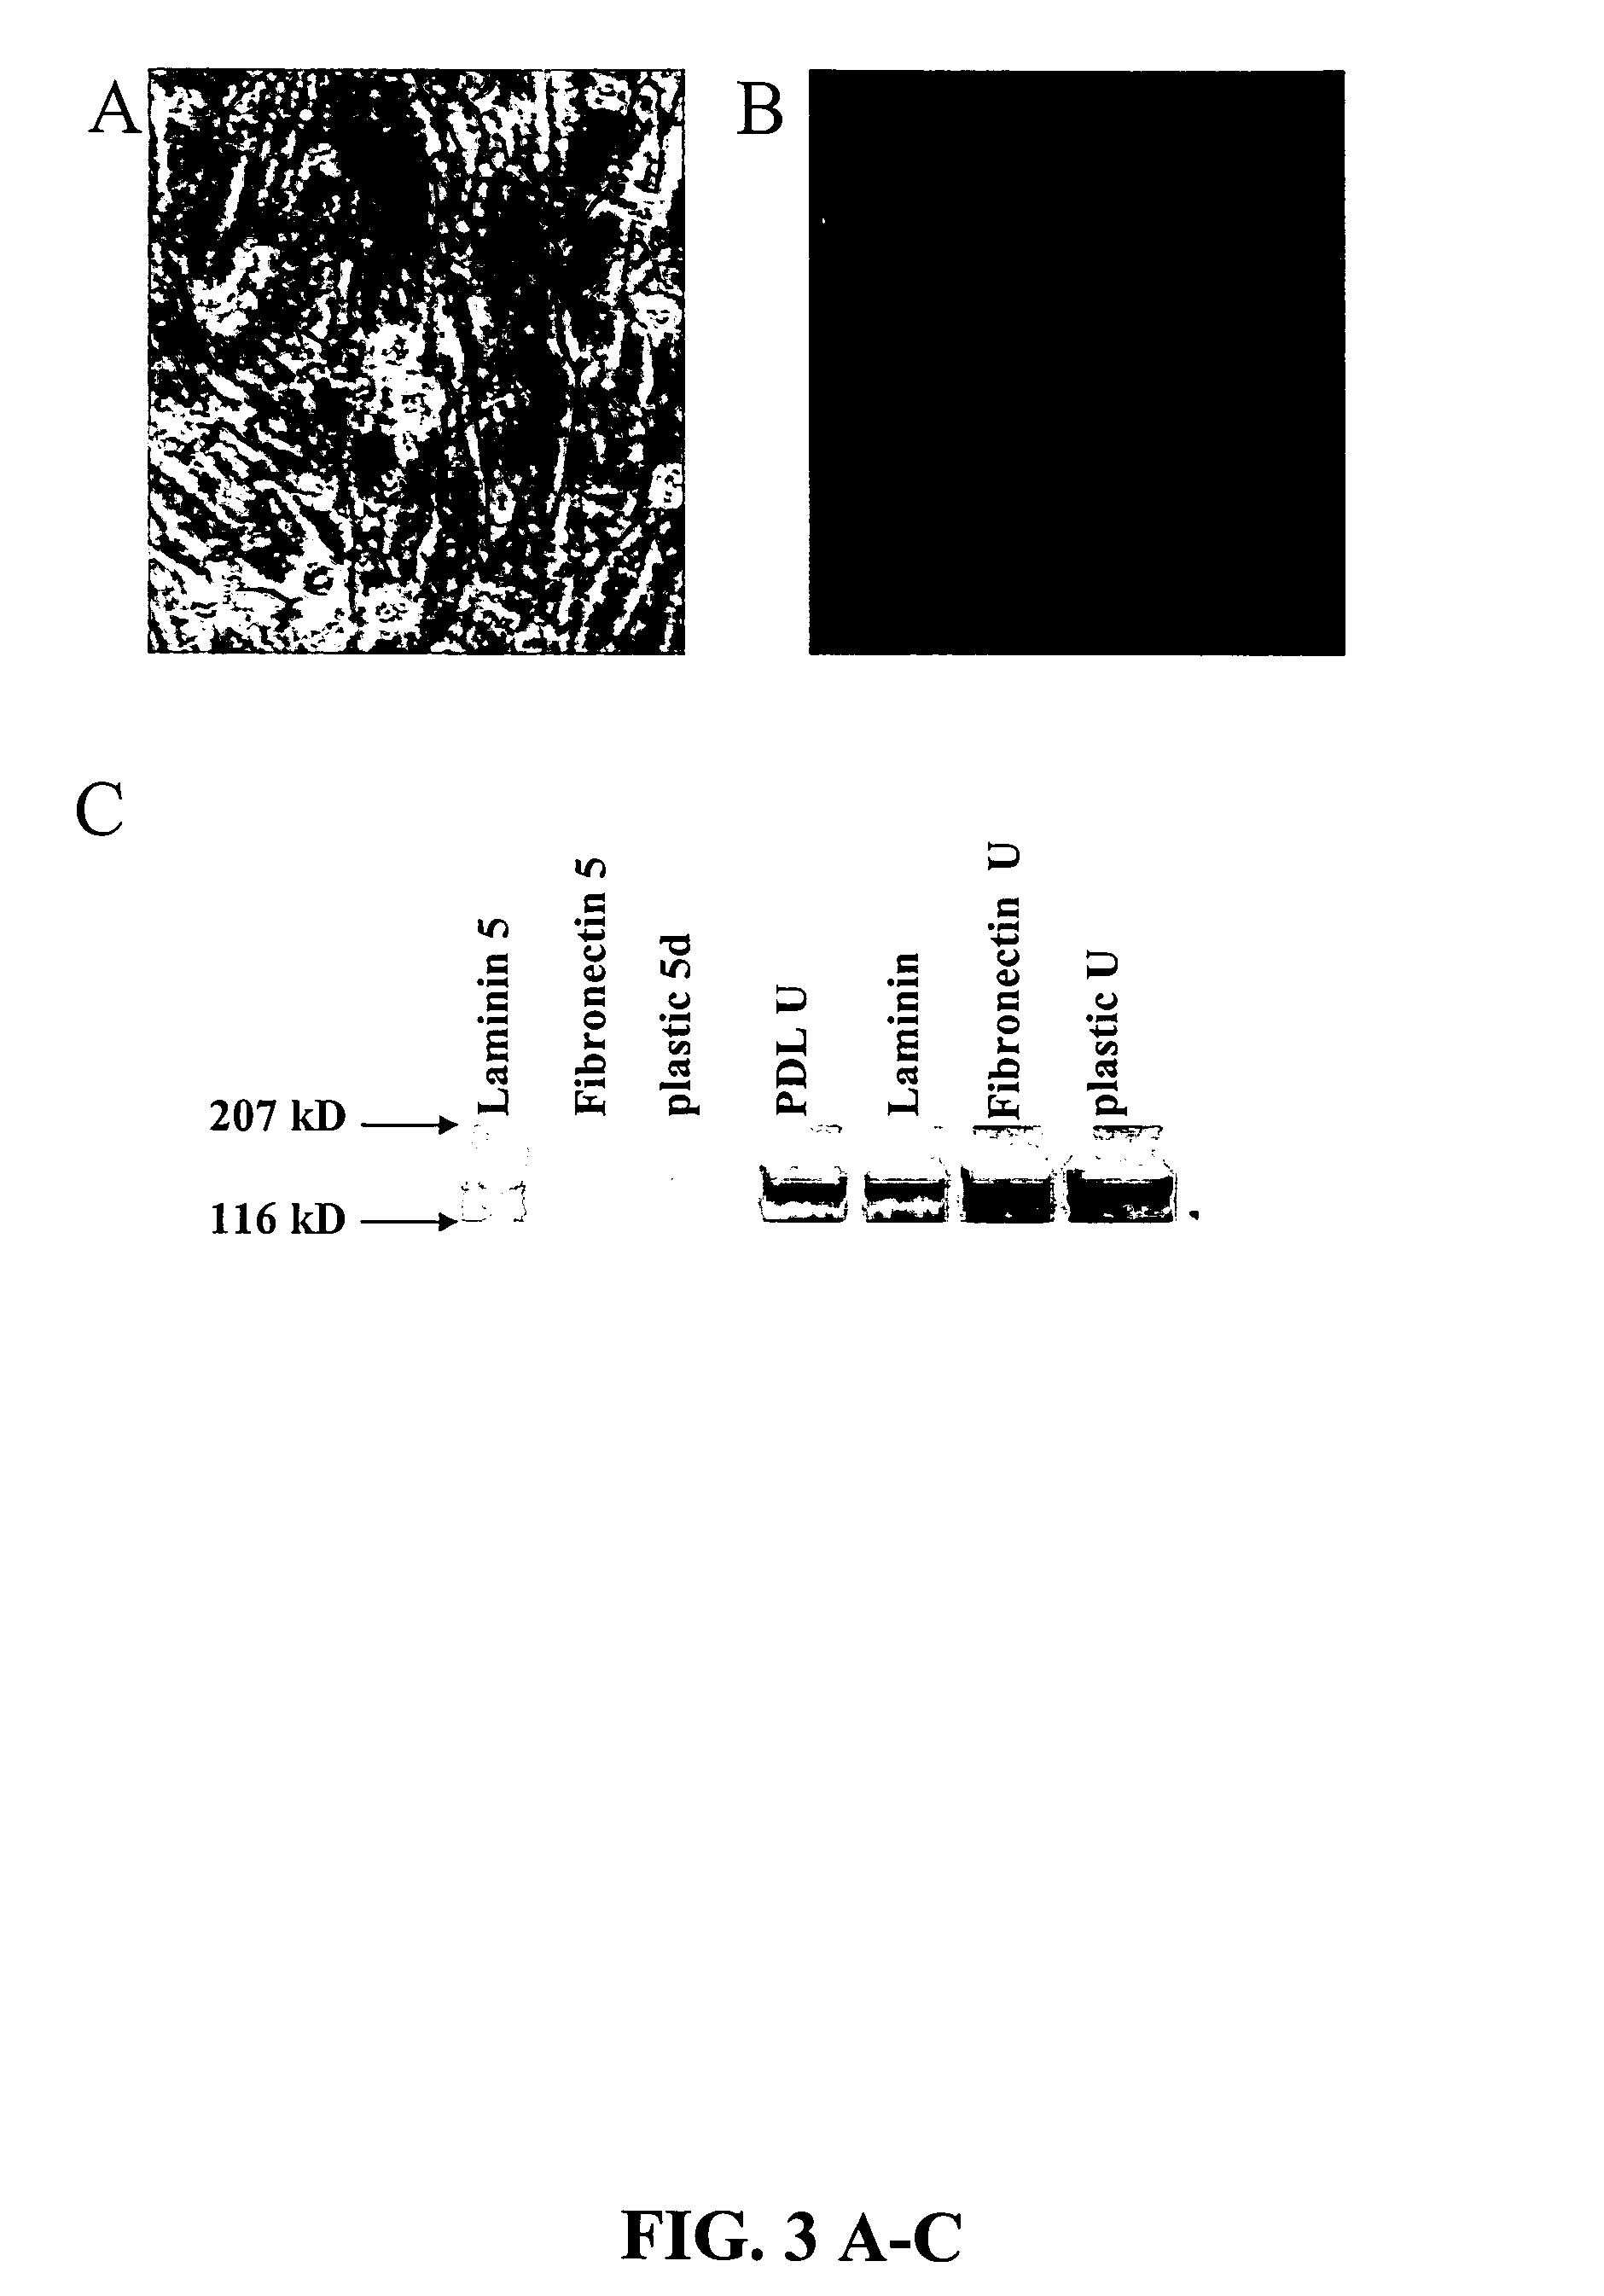 Cultures, products and methods using umbilical cord matrix cells